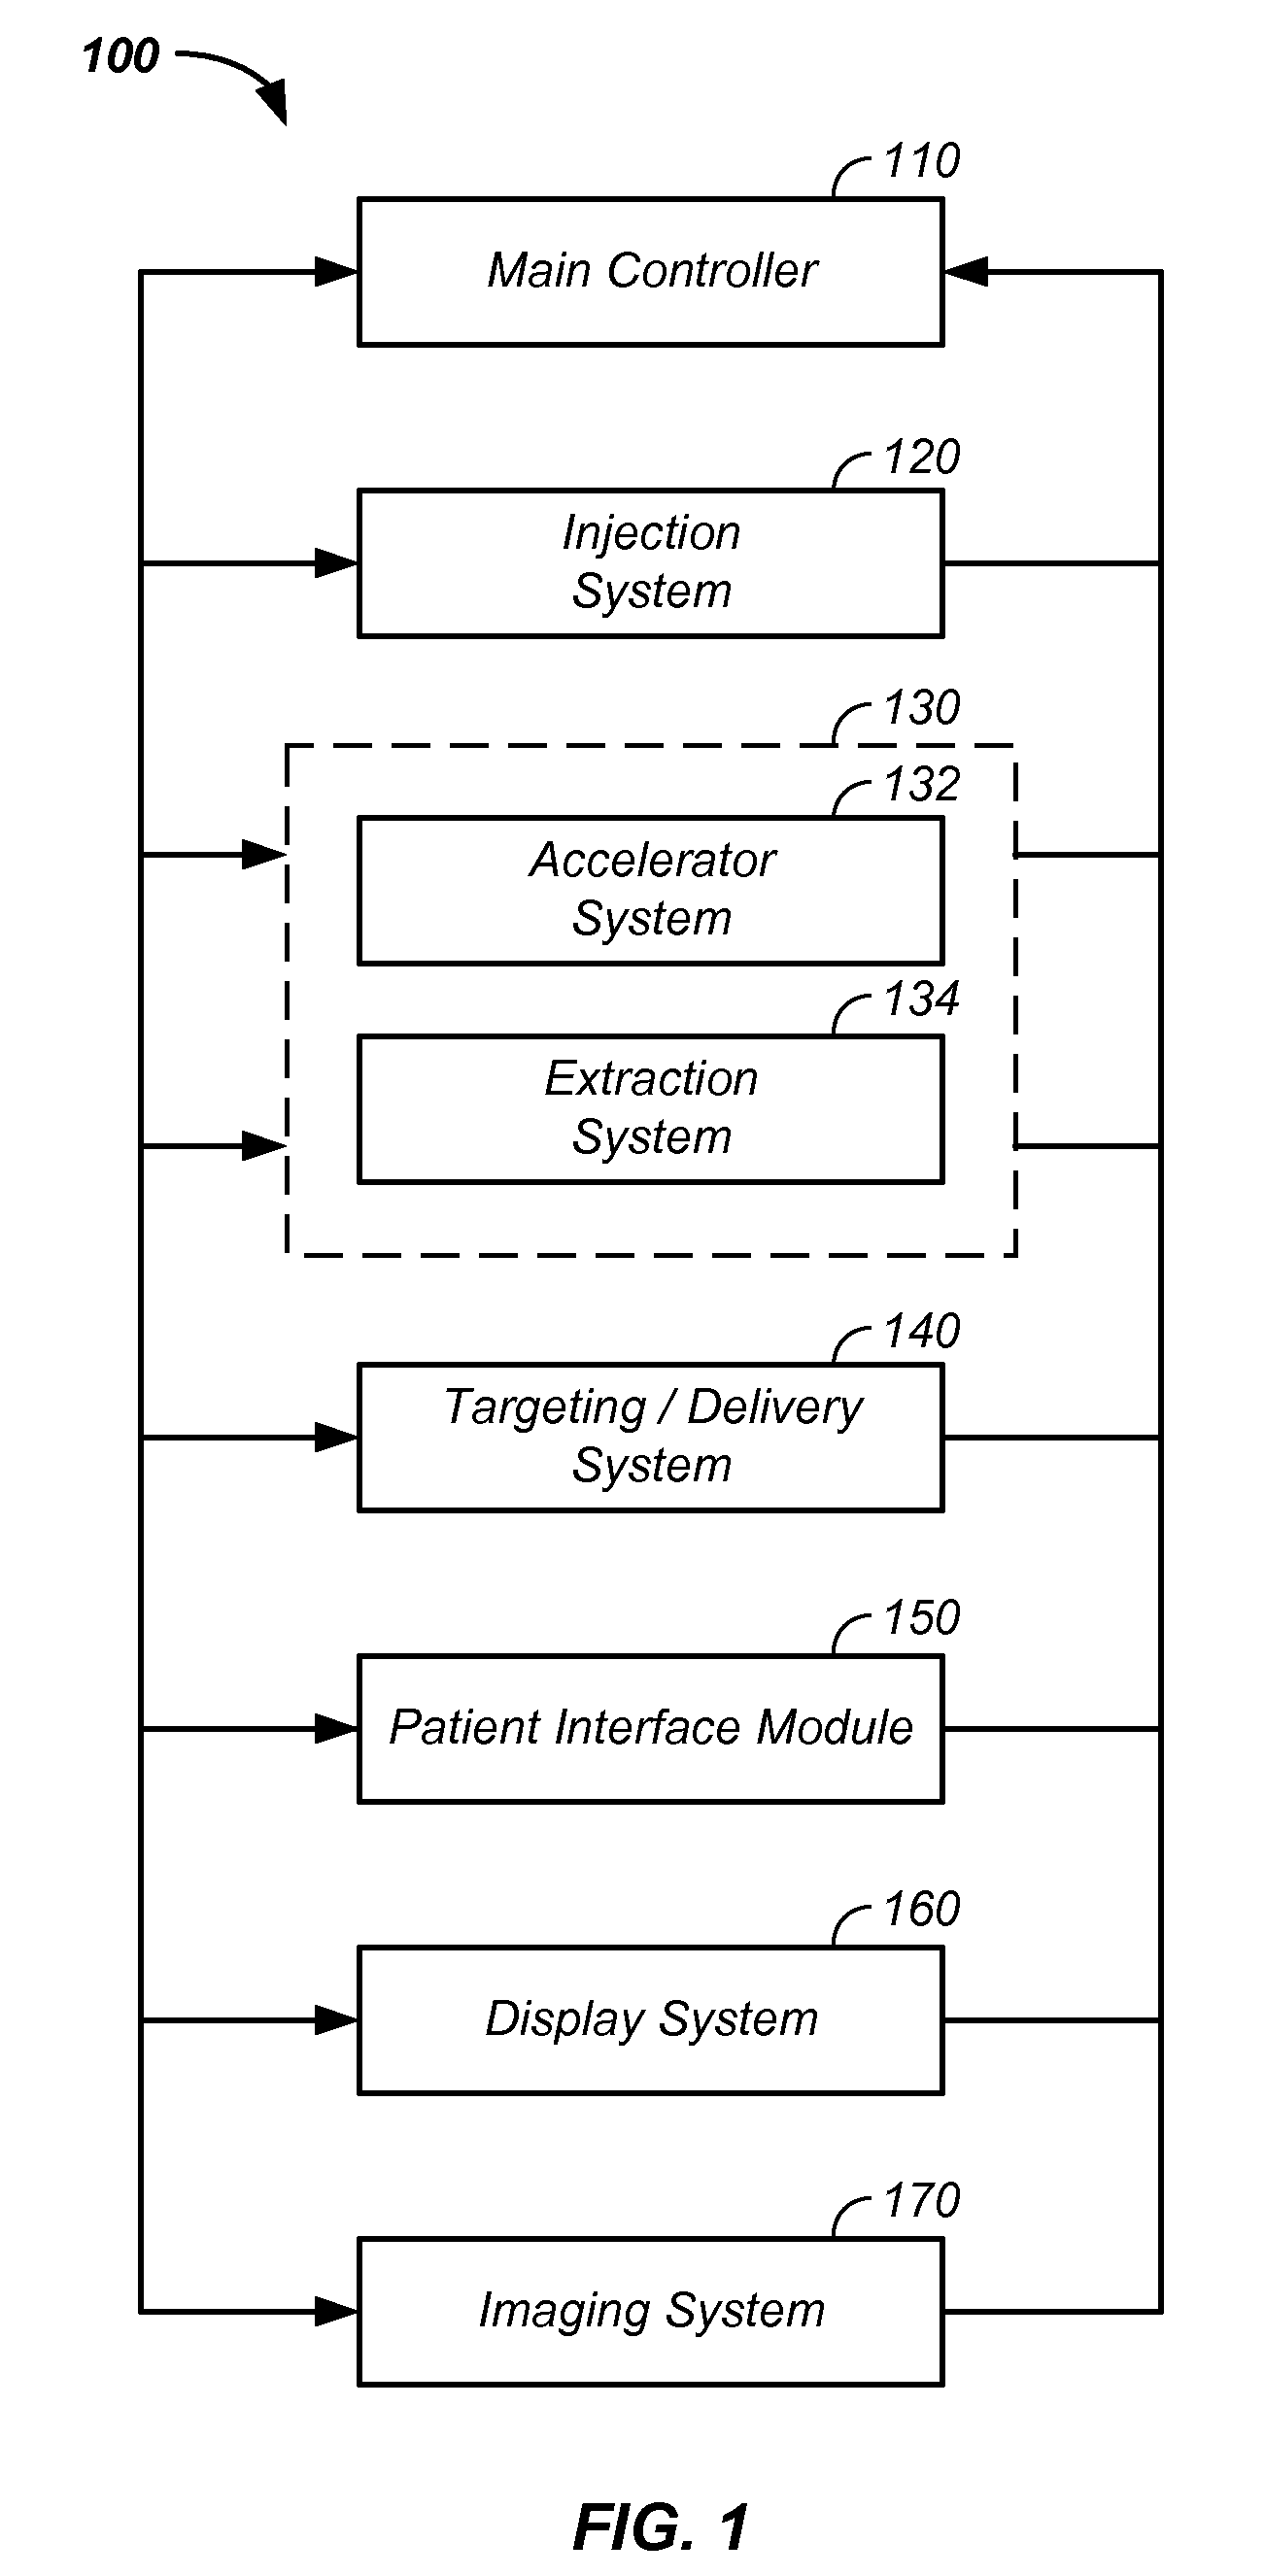 Multi-field charged particle cancer therapy method and apparatus coordinated with patient respiration